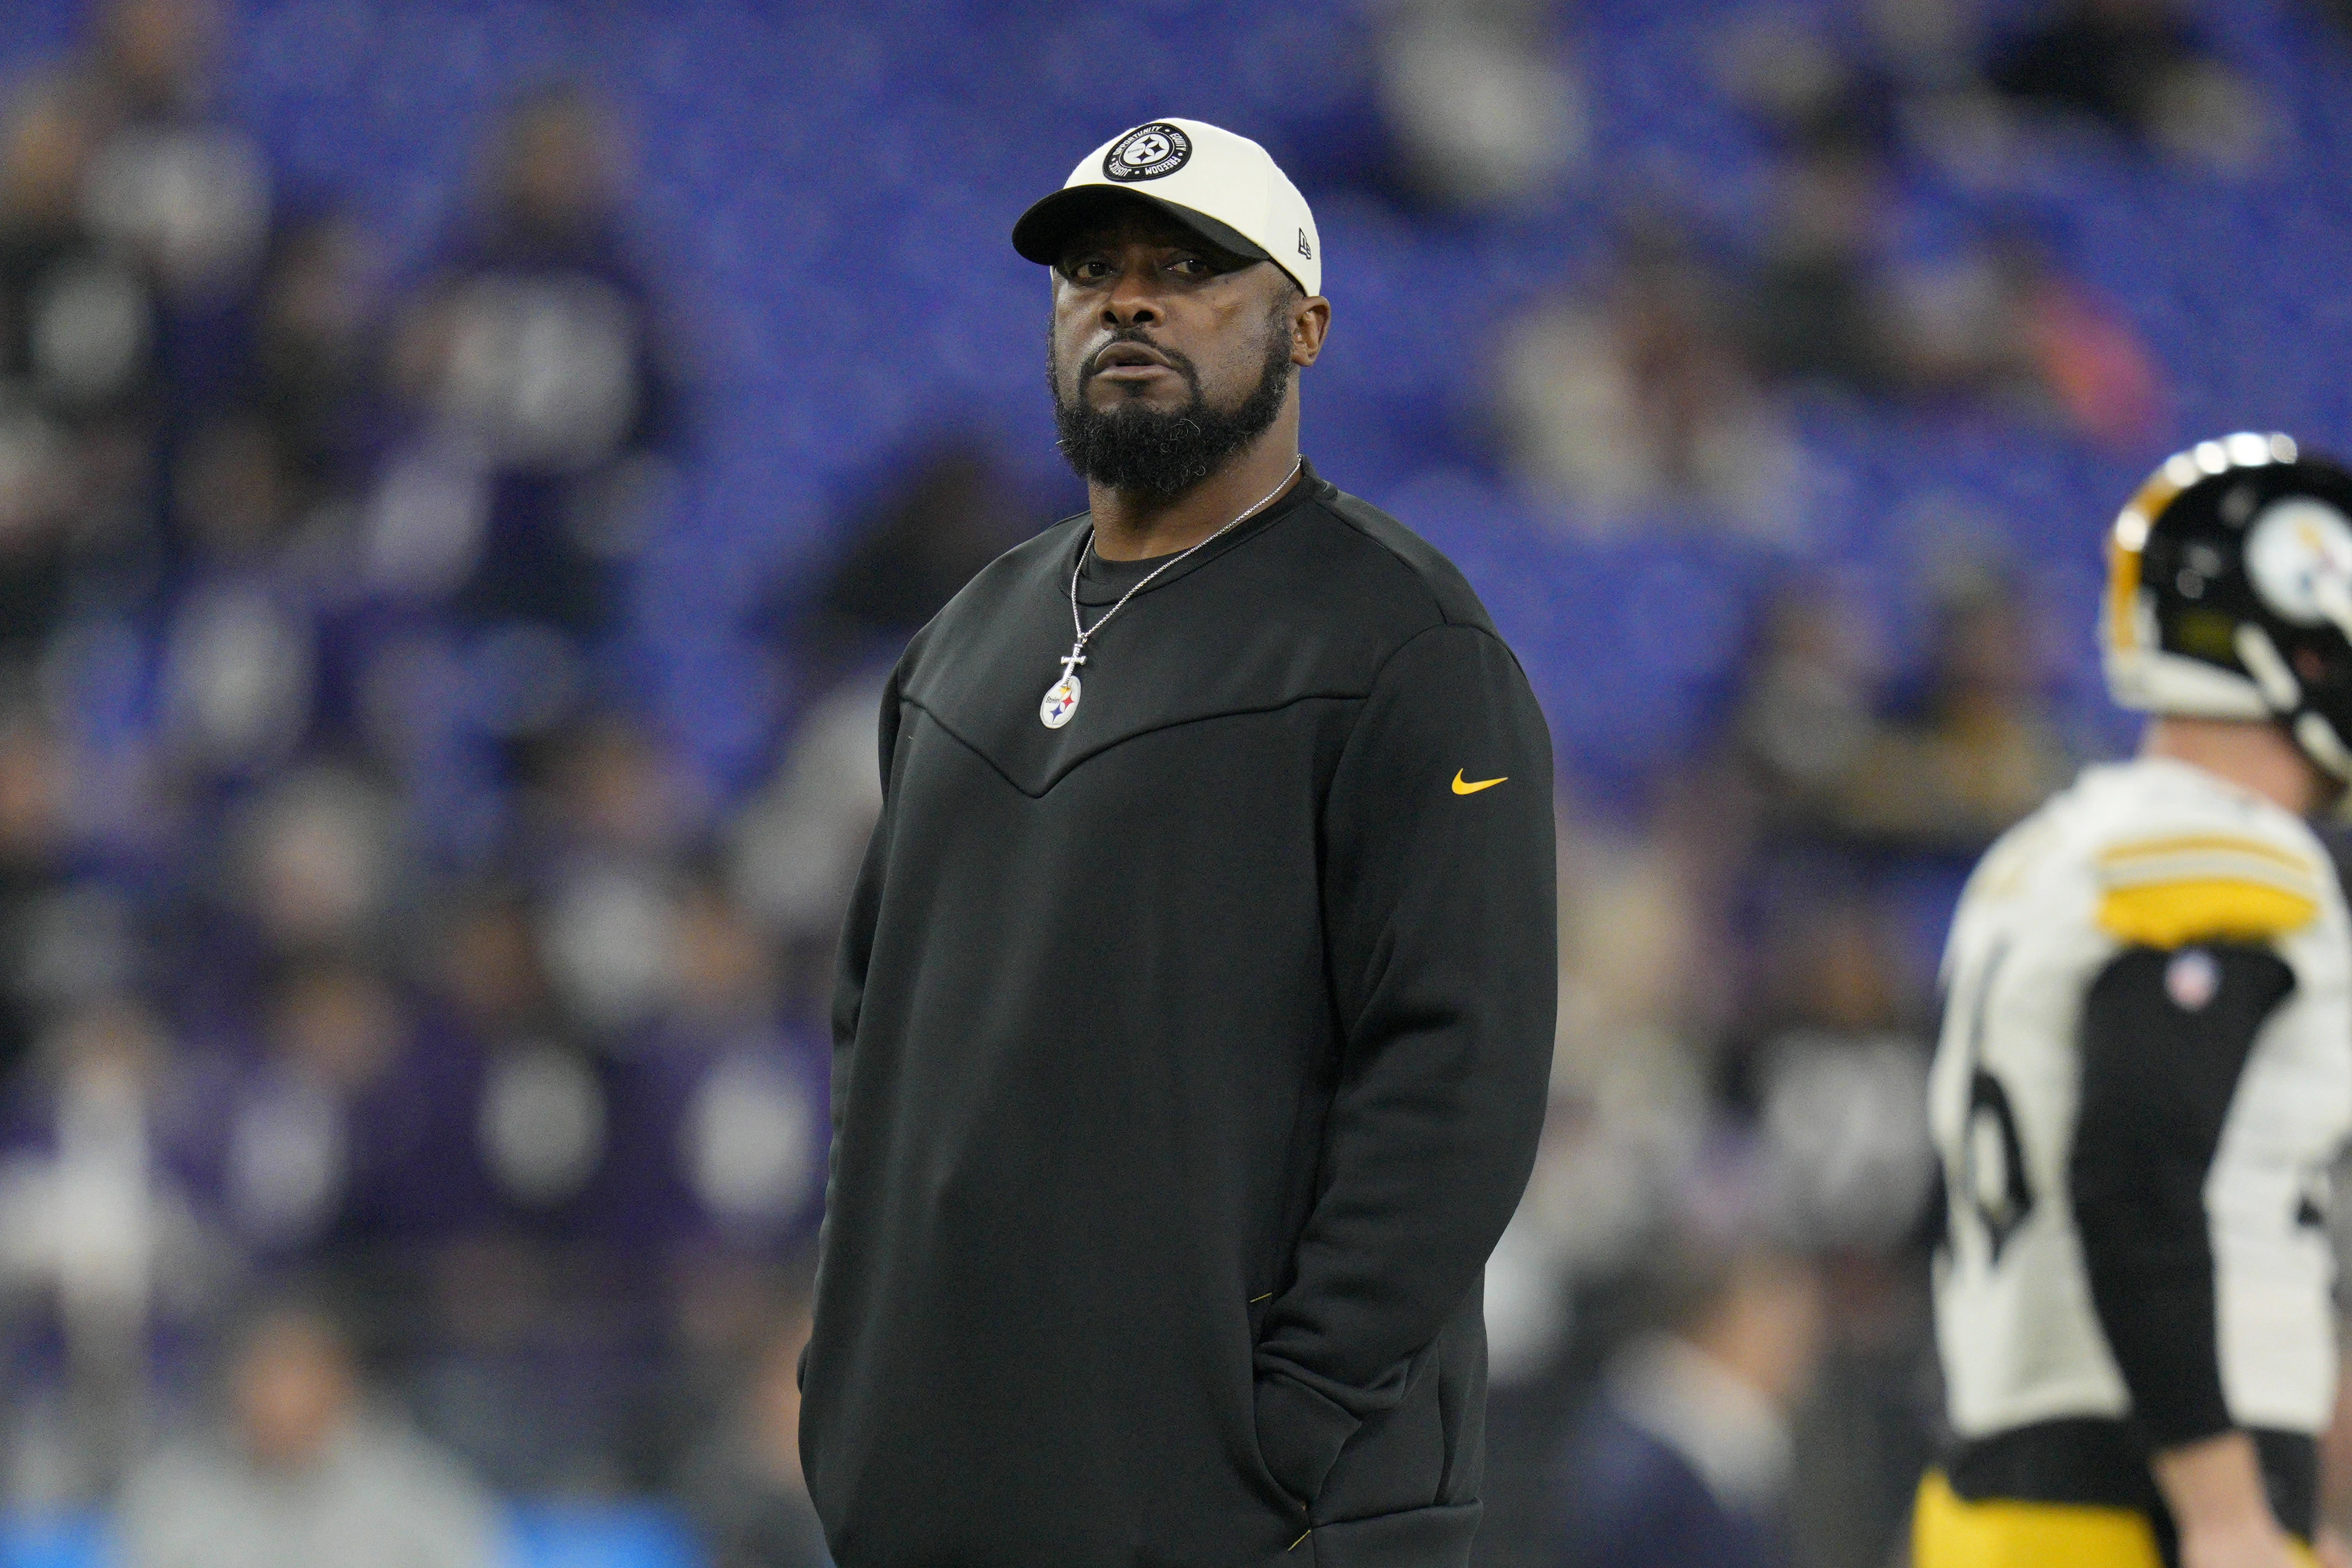 Jan 1, 2023; Baltimore, Maryland, USA; Pittsburgh Steelers head coach Mike Tomlin walks on the field before the game against the Baltimore Ravens at M&T Bank Stadium